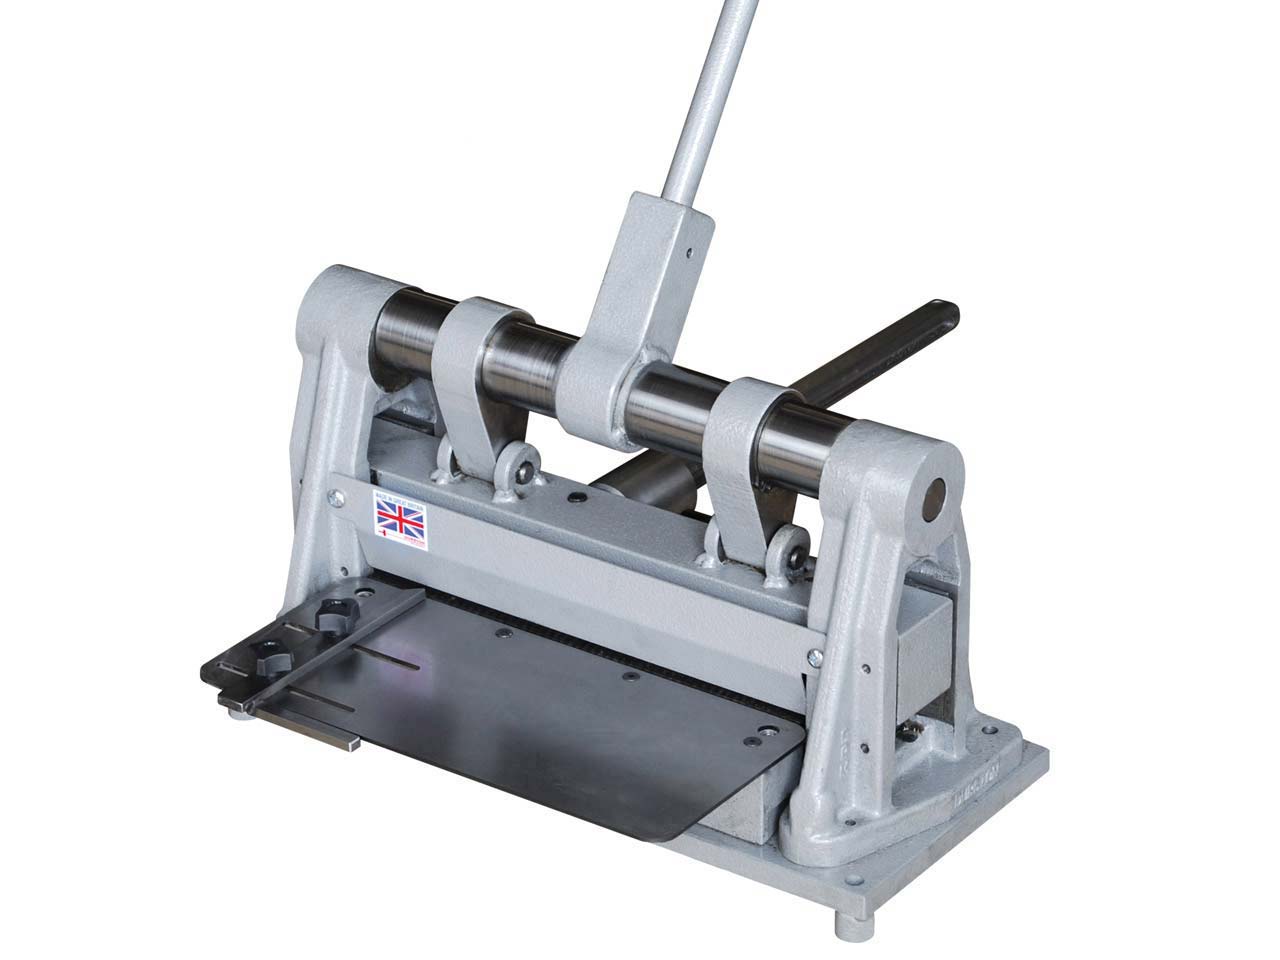 Durston Guillotine 300mm/12 Questions & Answers